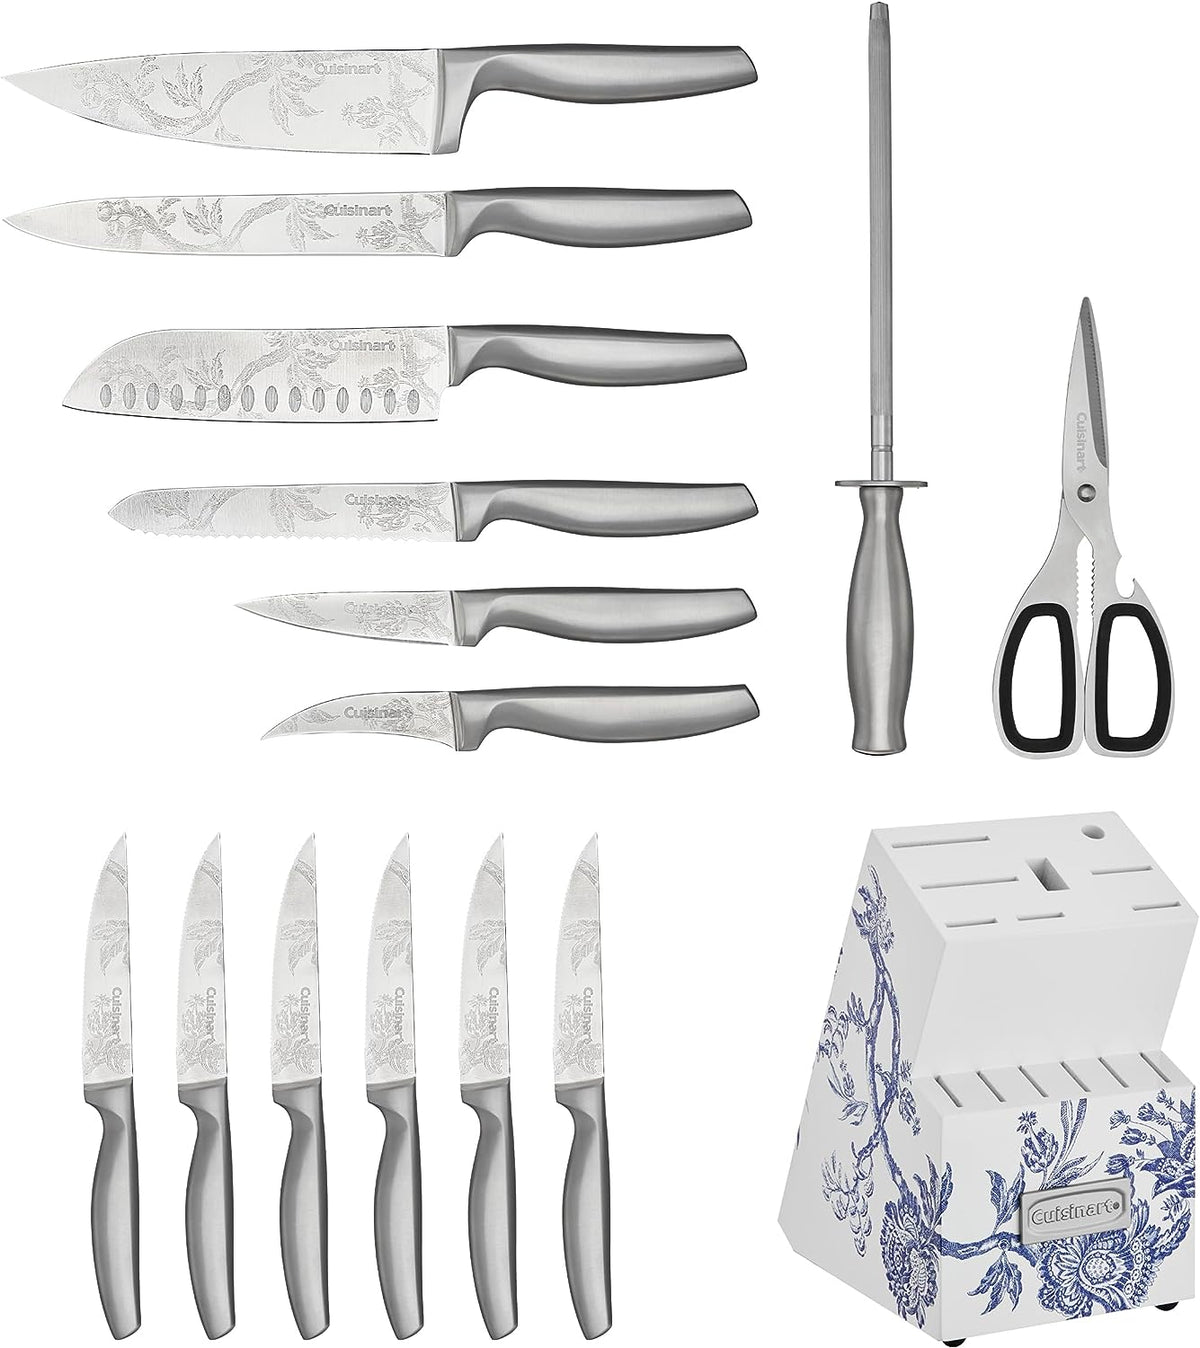 A Caskata X Cuisinart Limited Edition Arcadia 15 pc. German Stainless Steel Cutlery Block set, featuring a floral pattern and including a knife sharpener.